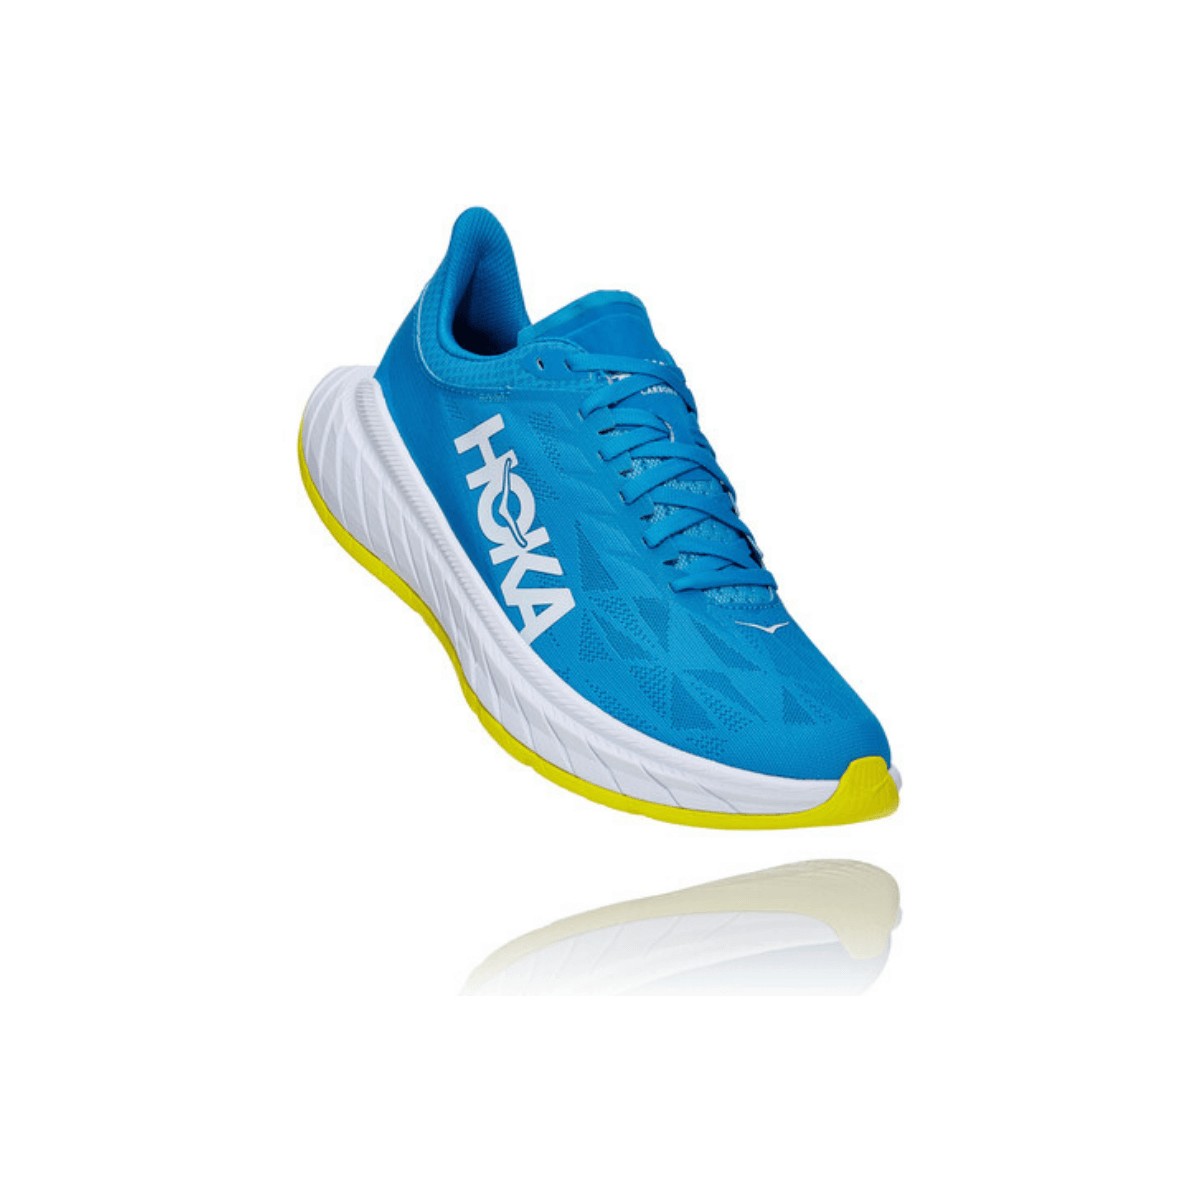 HOKA ONE ONE® Carbon X for Men